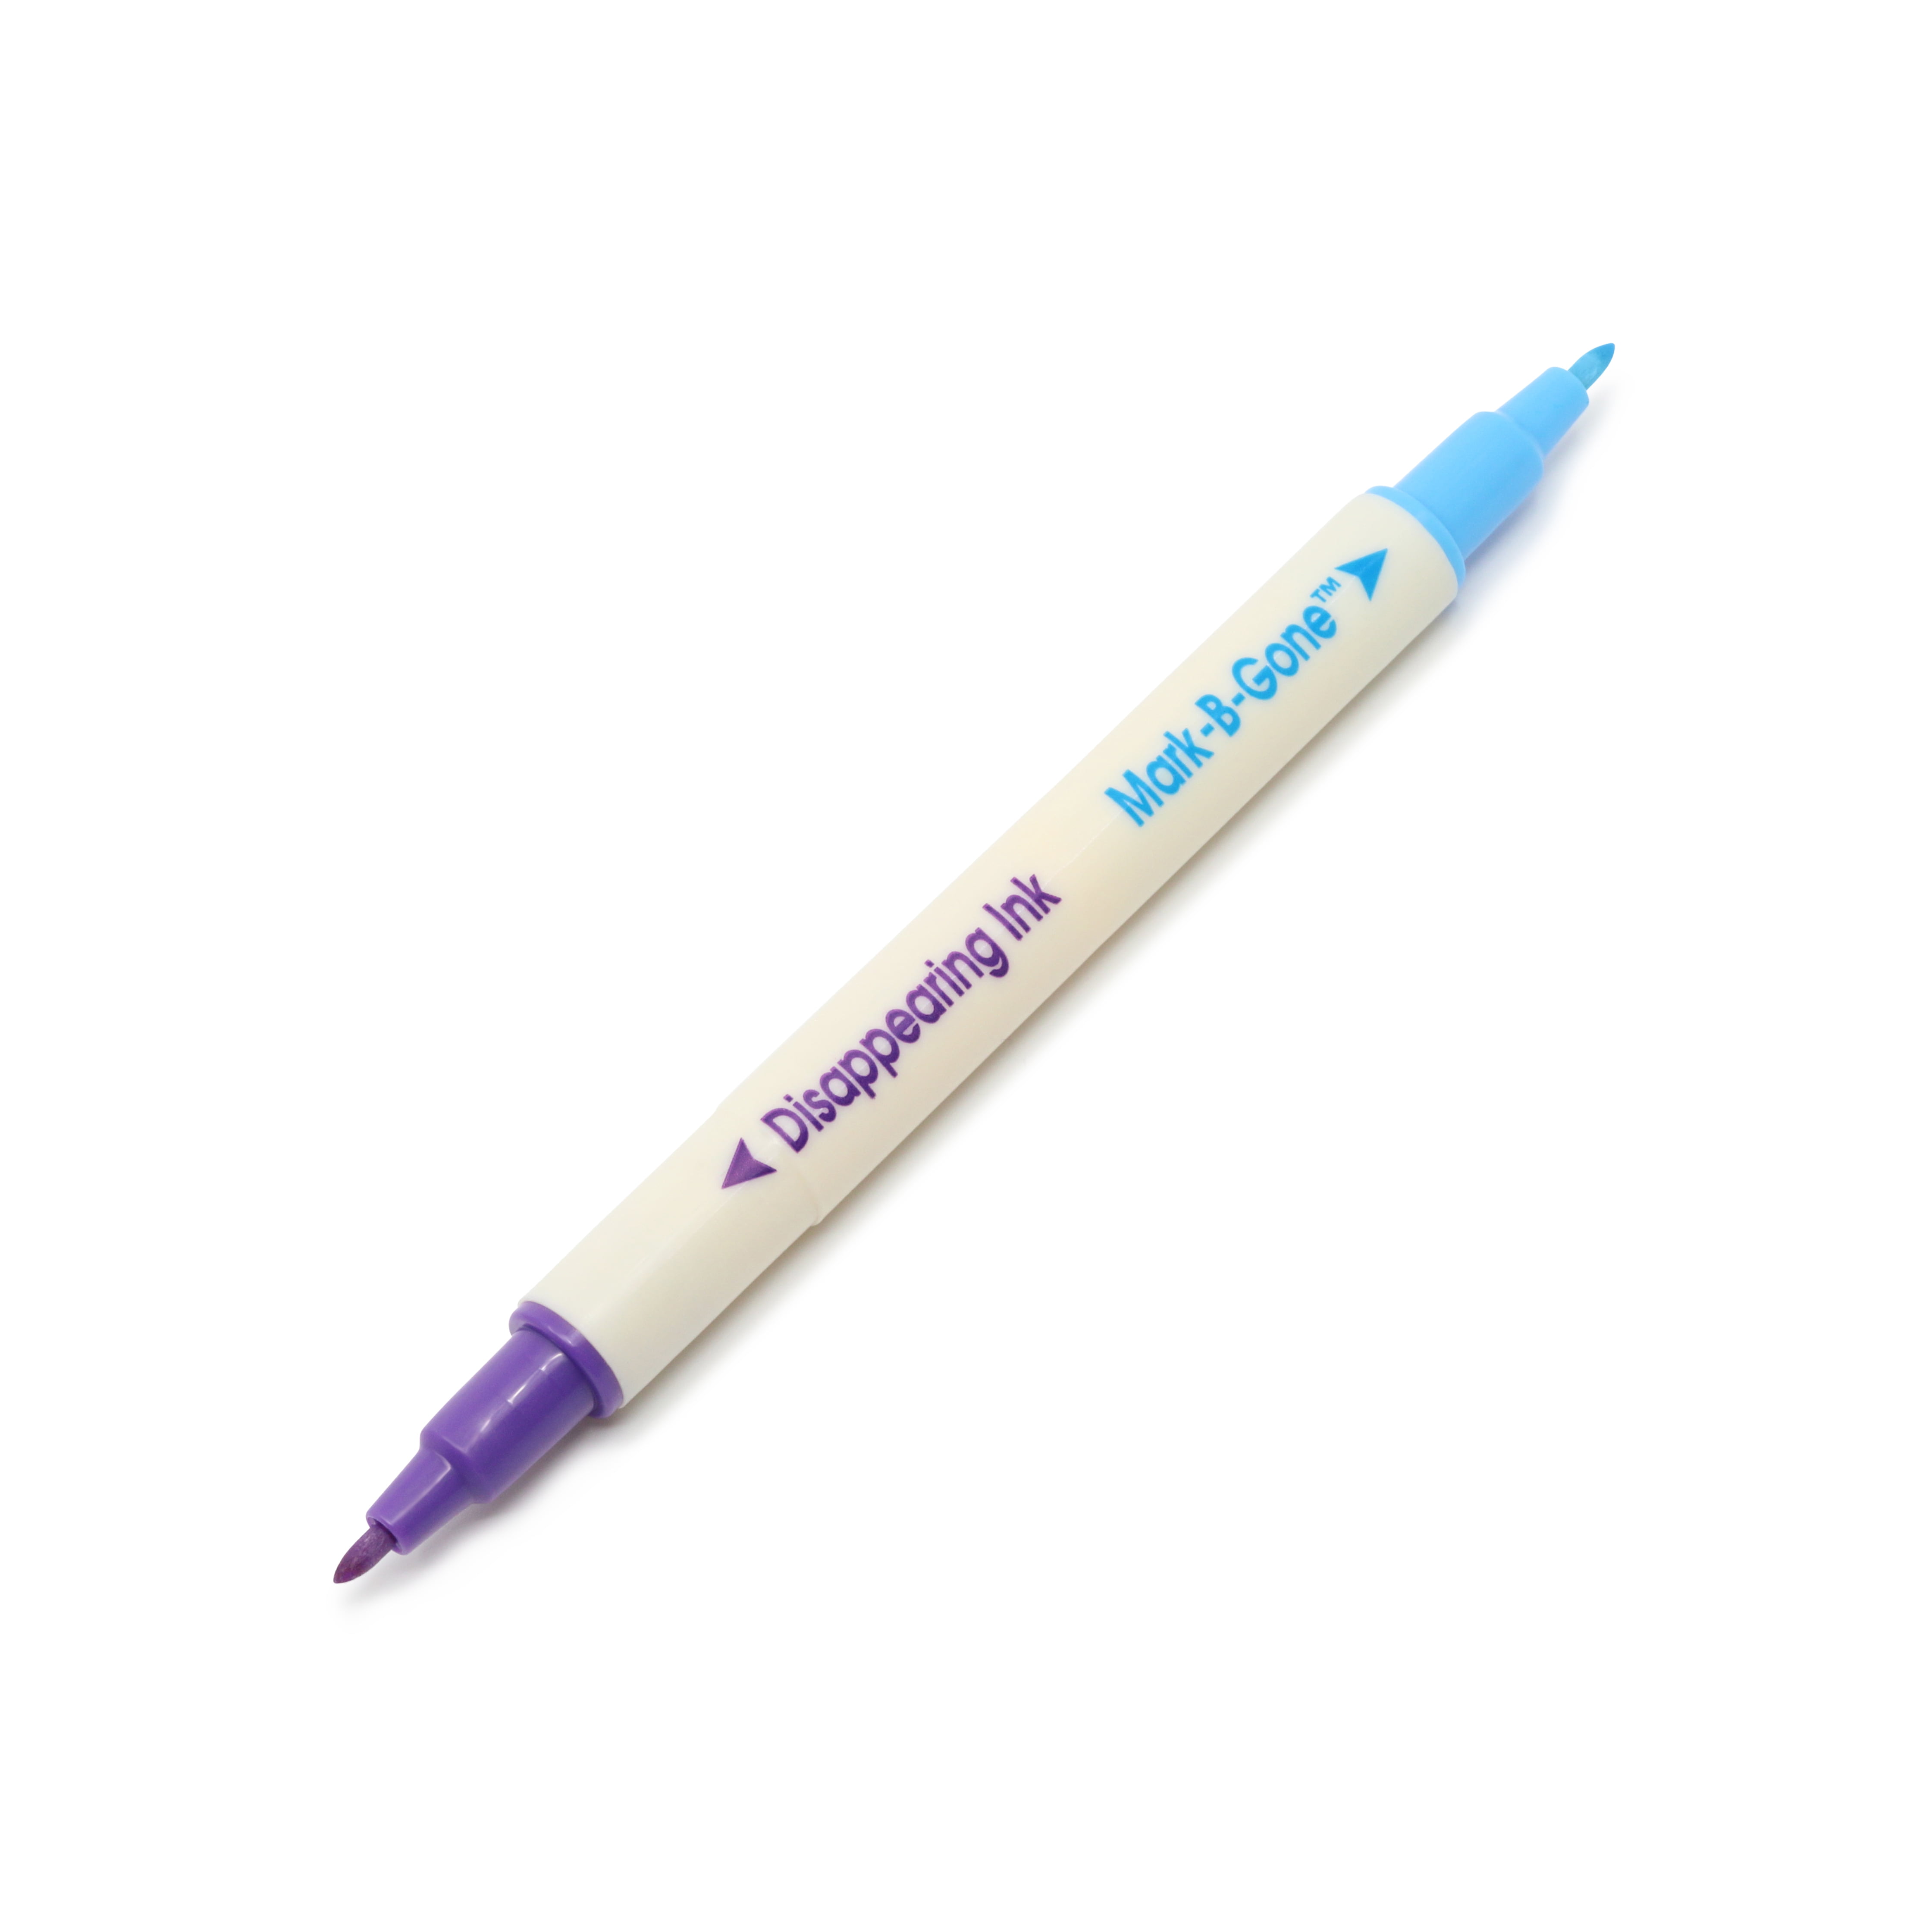  AF Permanent Ink Remove Spray for Permanent Marker or Pen from  Whiteboards - 10 x 125ml : Everything Else